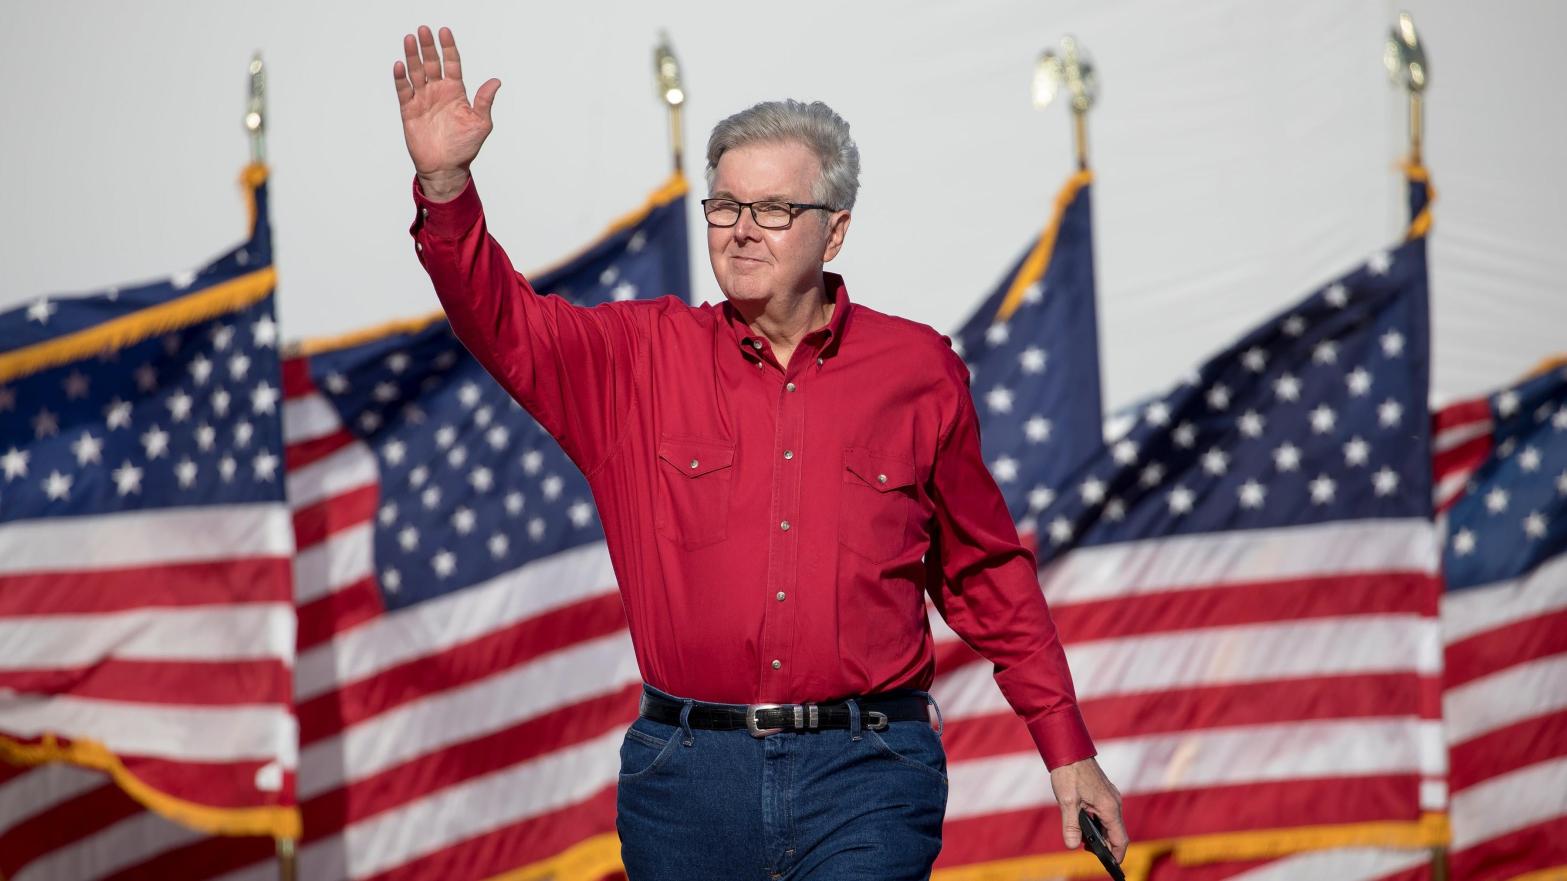 Lt. Gov. Dan Patrick waves to a crowd at a Trump rally.  (Photo: Nick Wagner, AP)